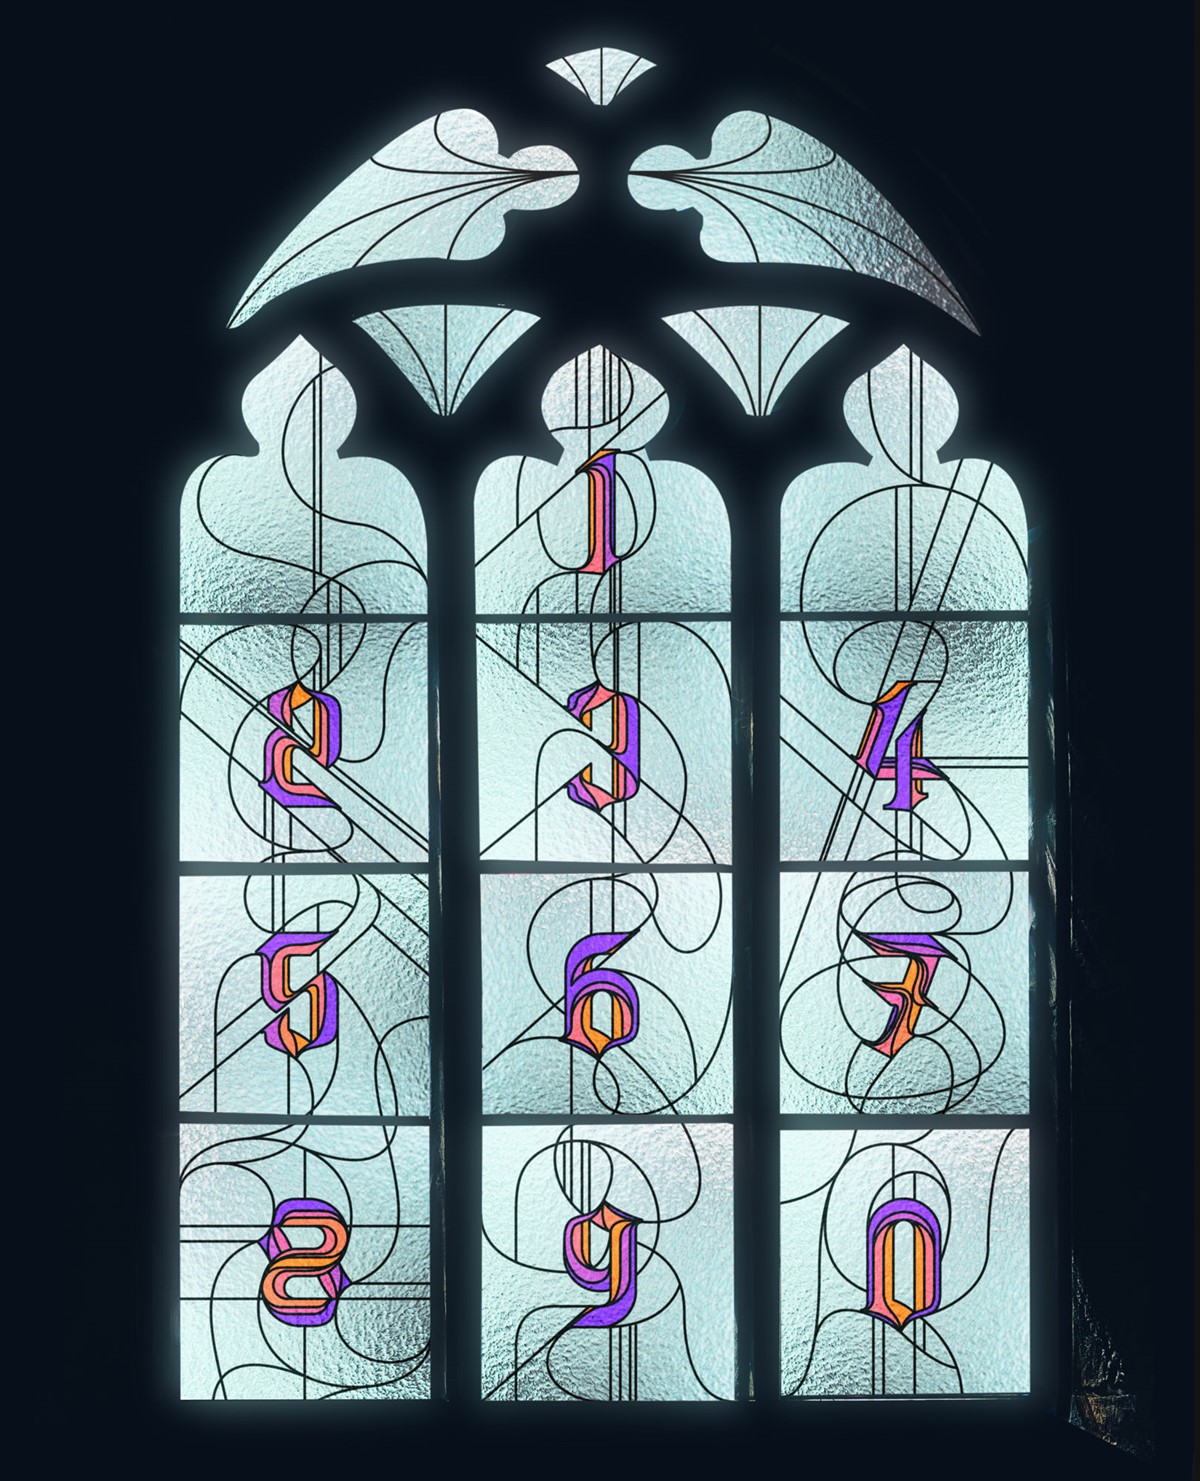 BLK LTR type experiment re-visited. Stain glass window. Numerals 0-9 designed by Superfried, Manchester.